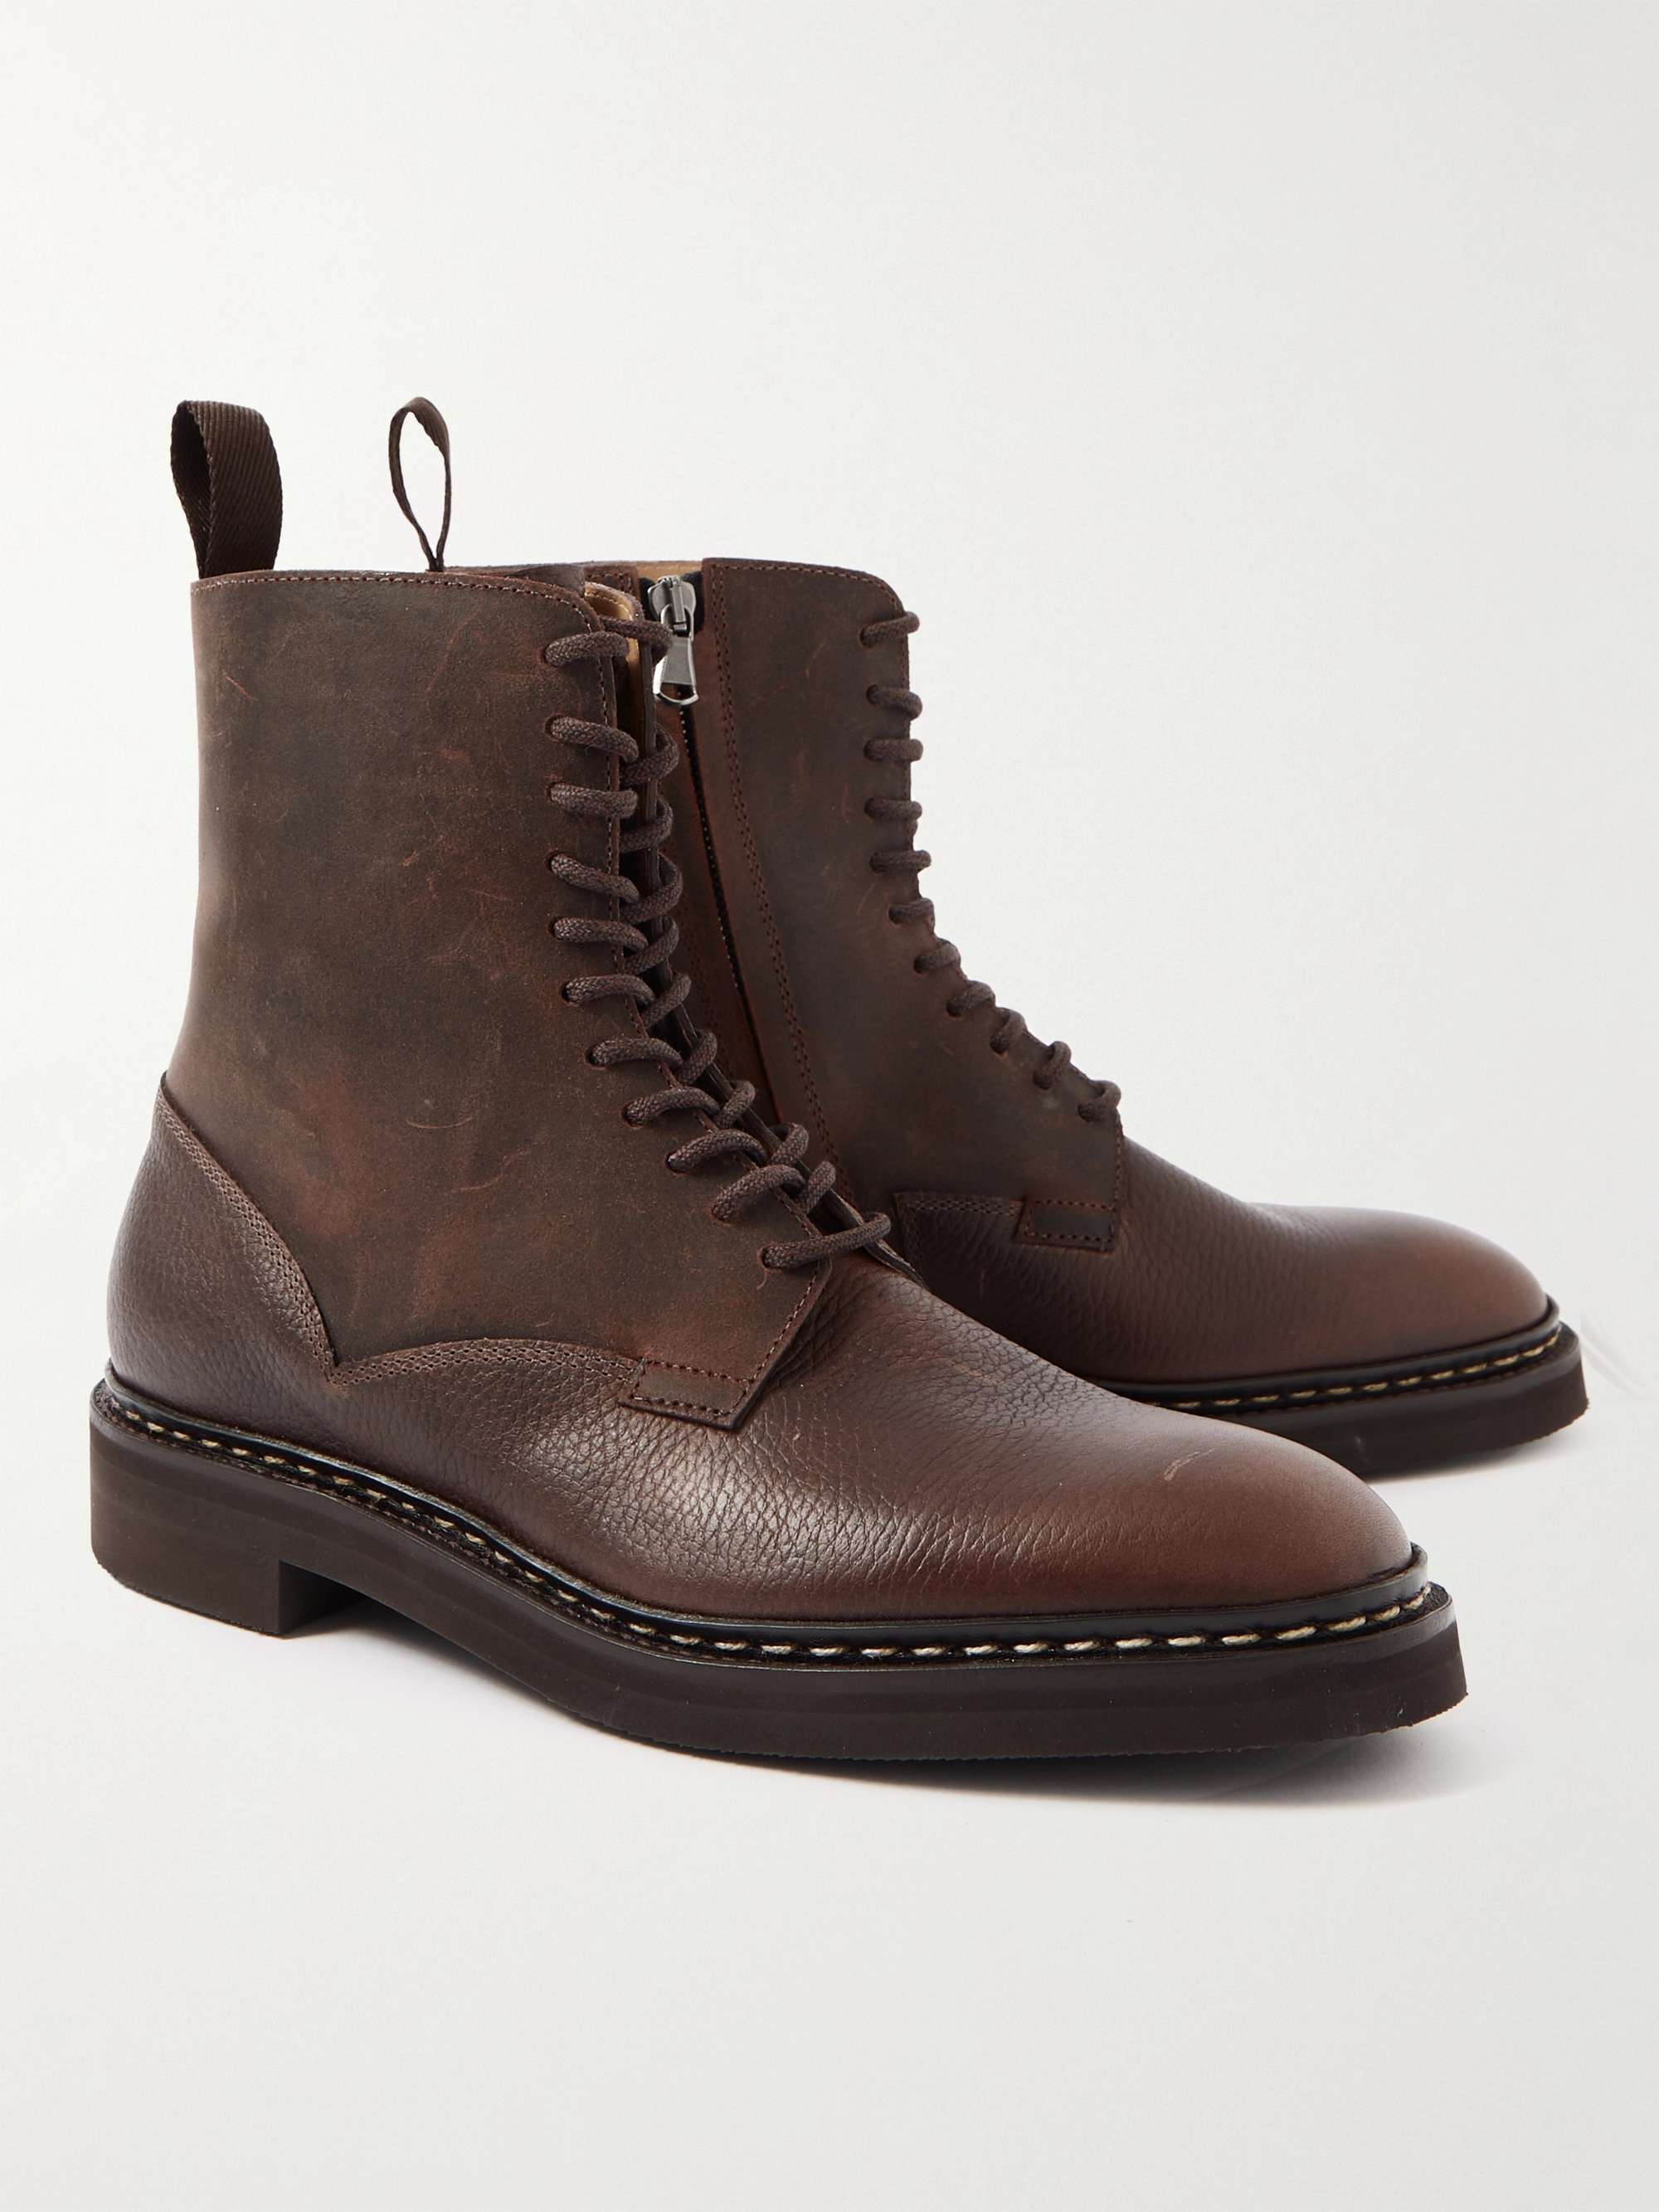 JOHN LOBB Perth Waxed-Suede and Full-Grain Leather Boots